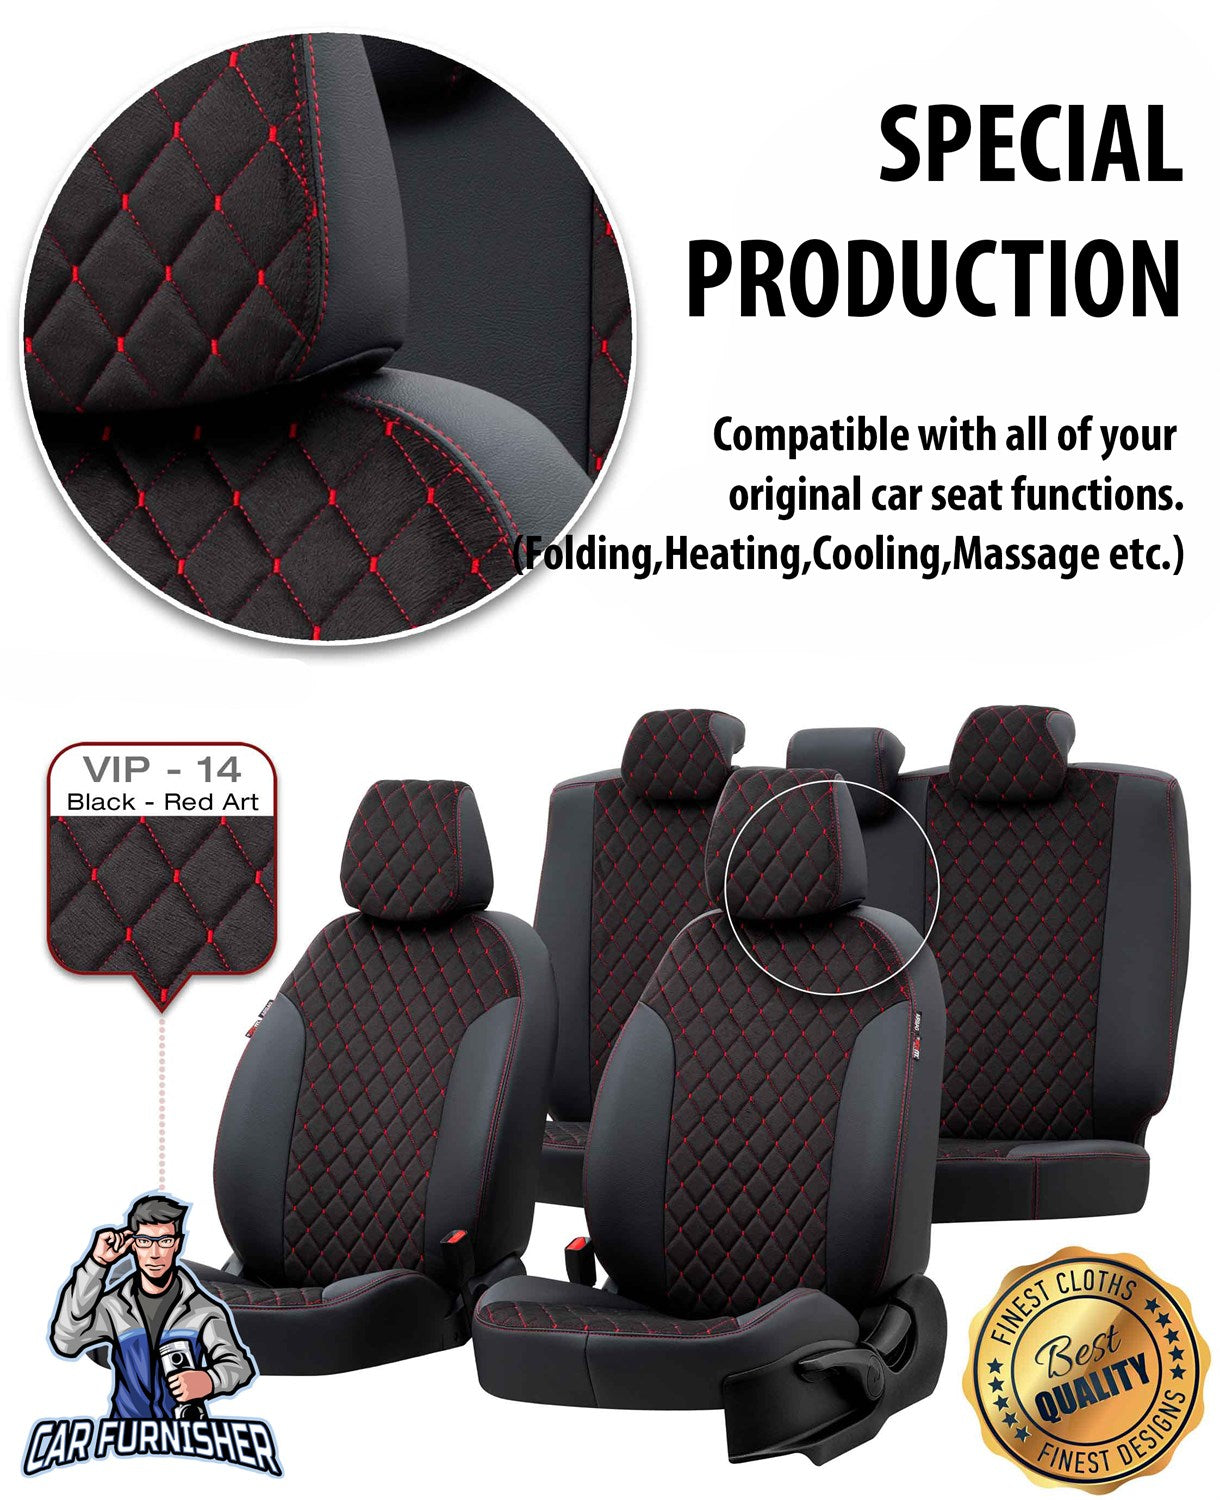 Geely Emgrand Seat Covers Madrid Foal Feather Design Beige Leather & Foal Feather